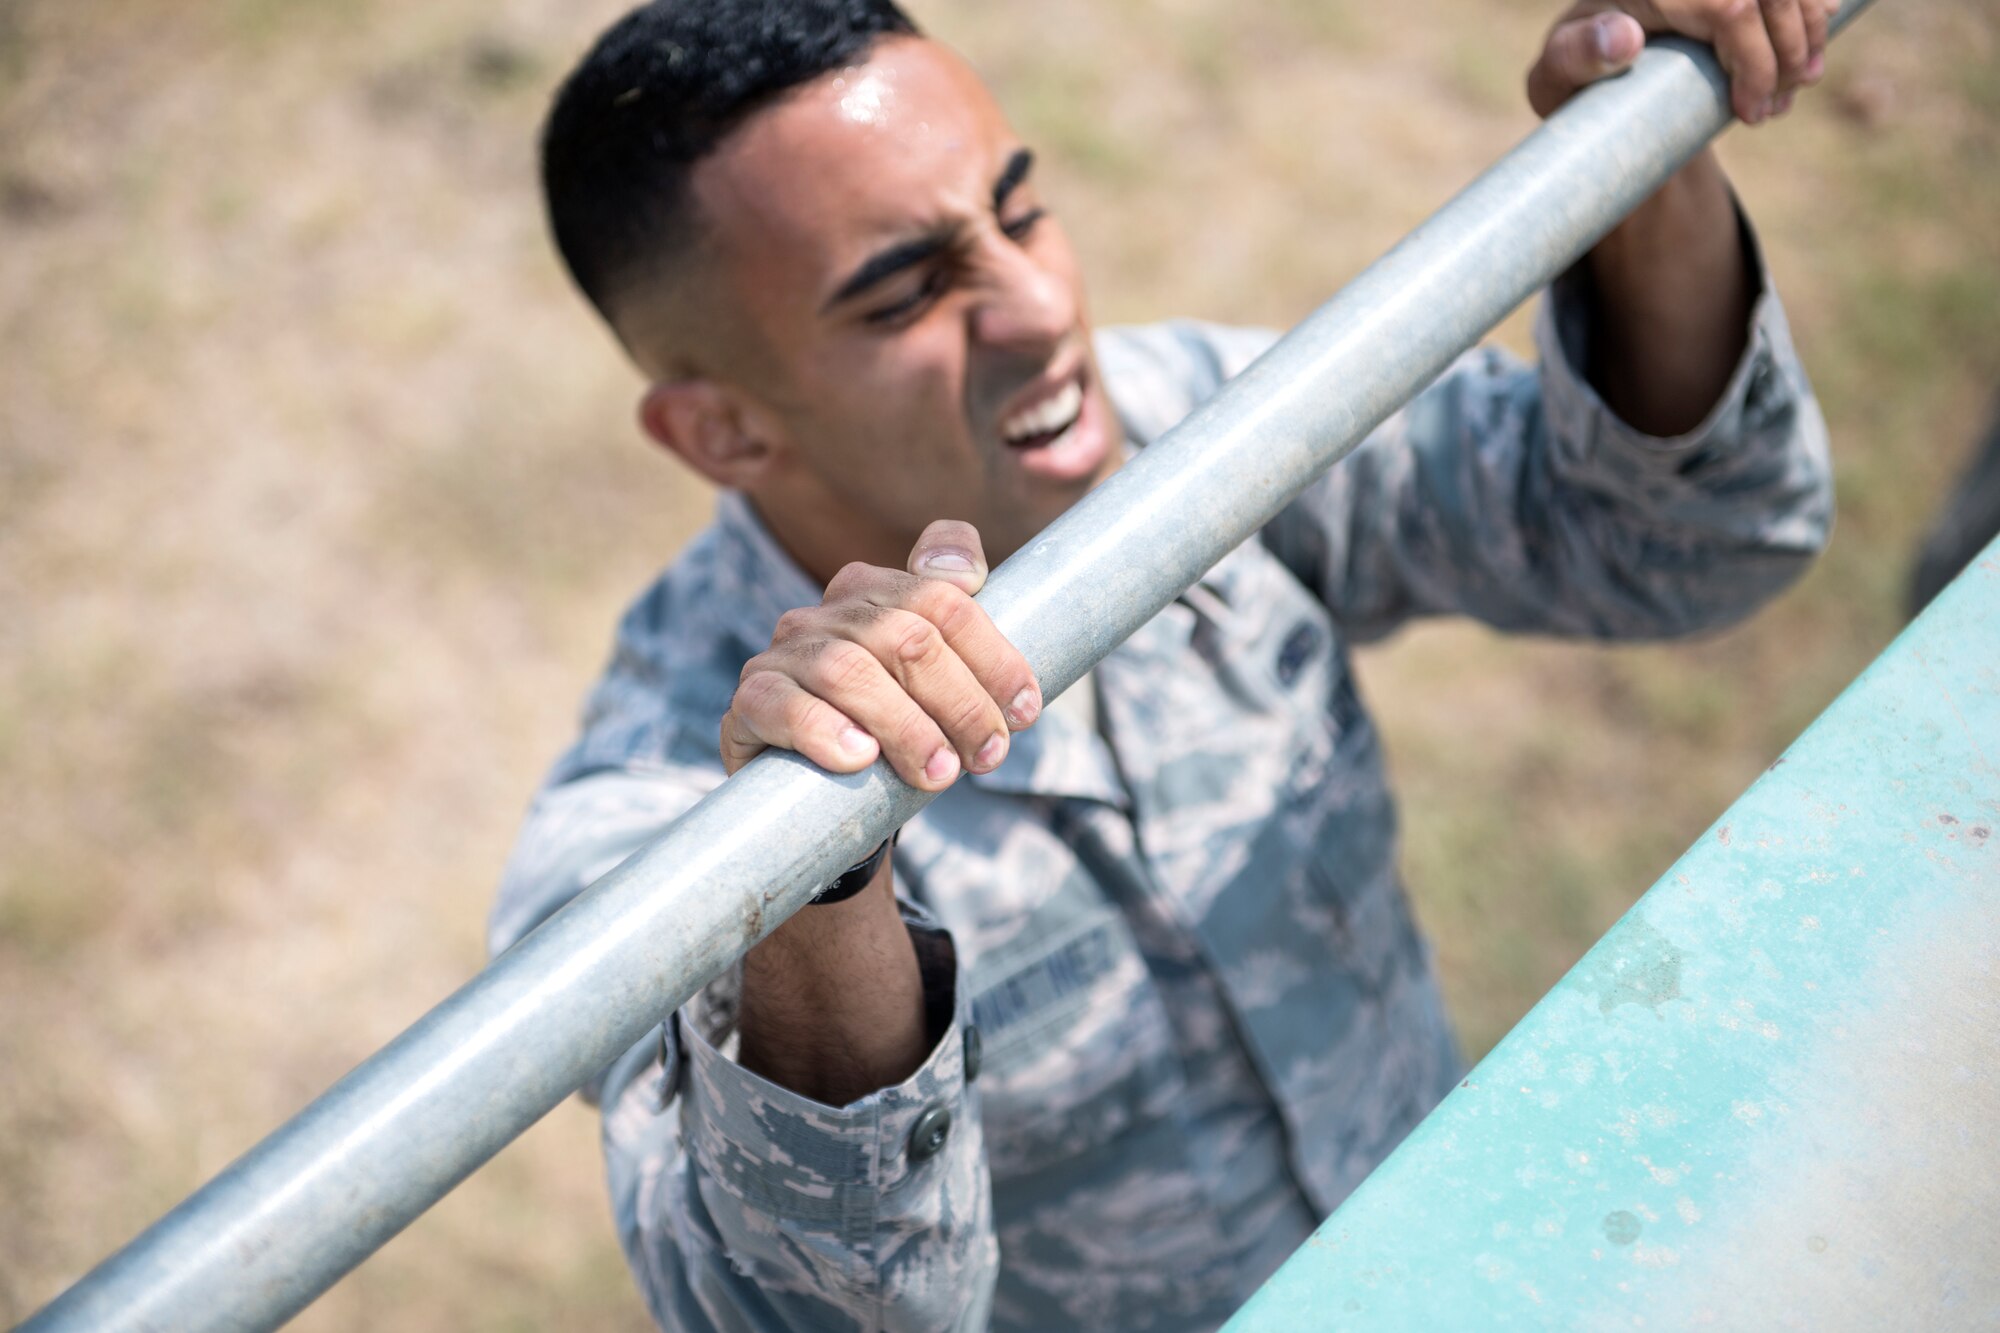 An Airmen performs an obstacle during an obstacle course